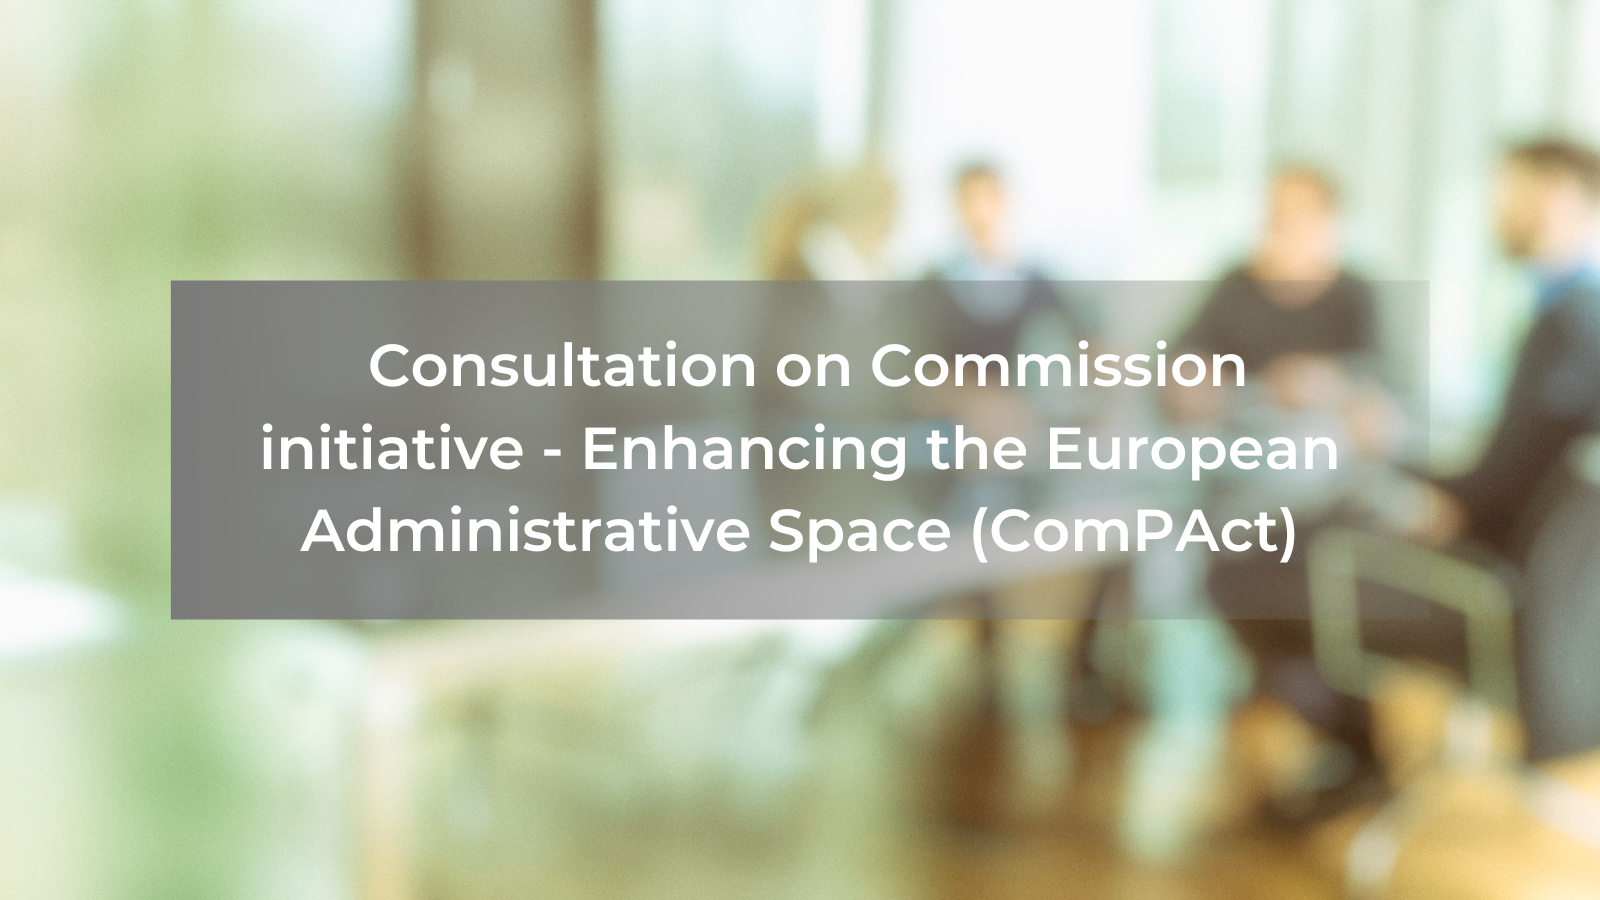 Consultation on Commission initiative - Enhancing the European Administrative Space (ComPAct) (1)